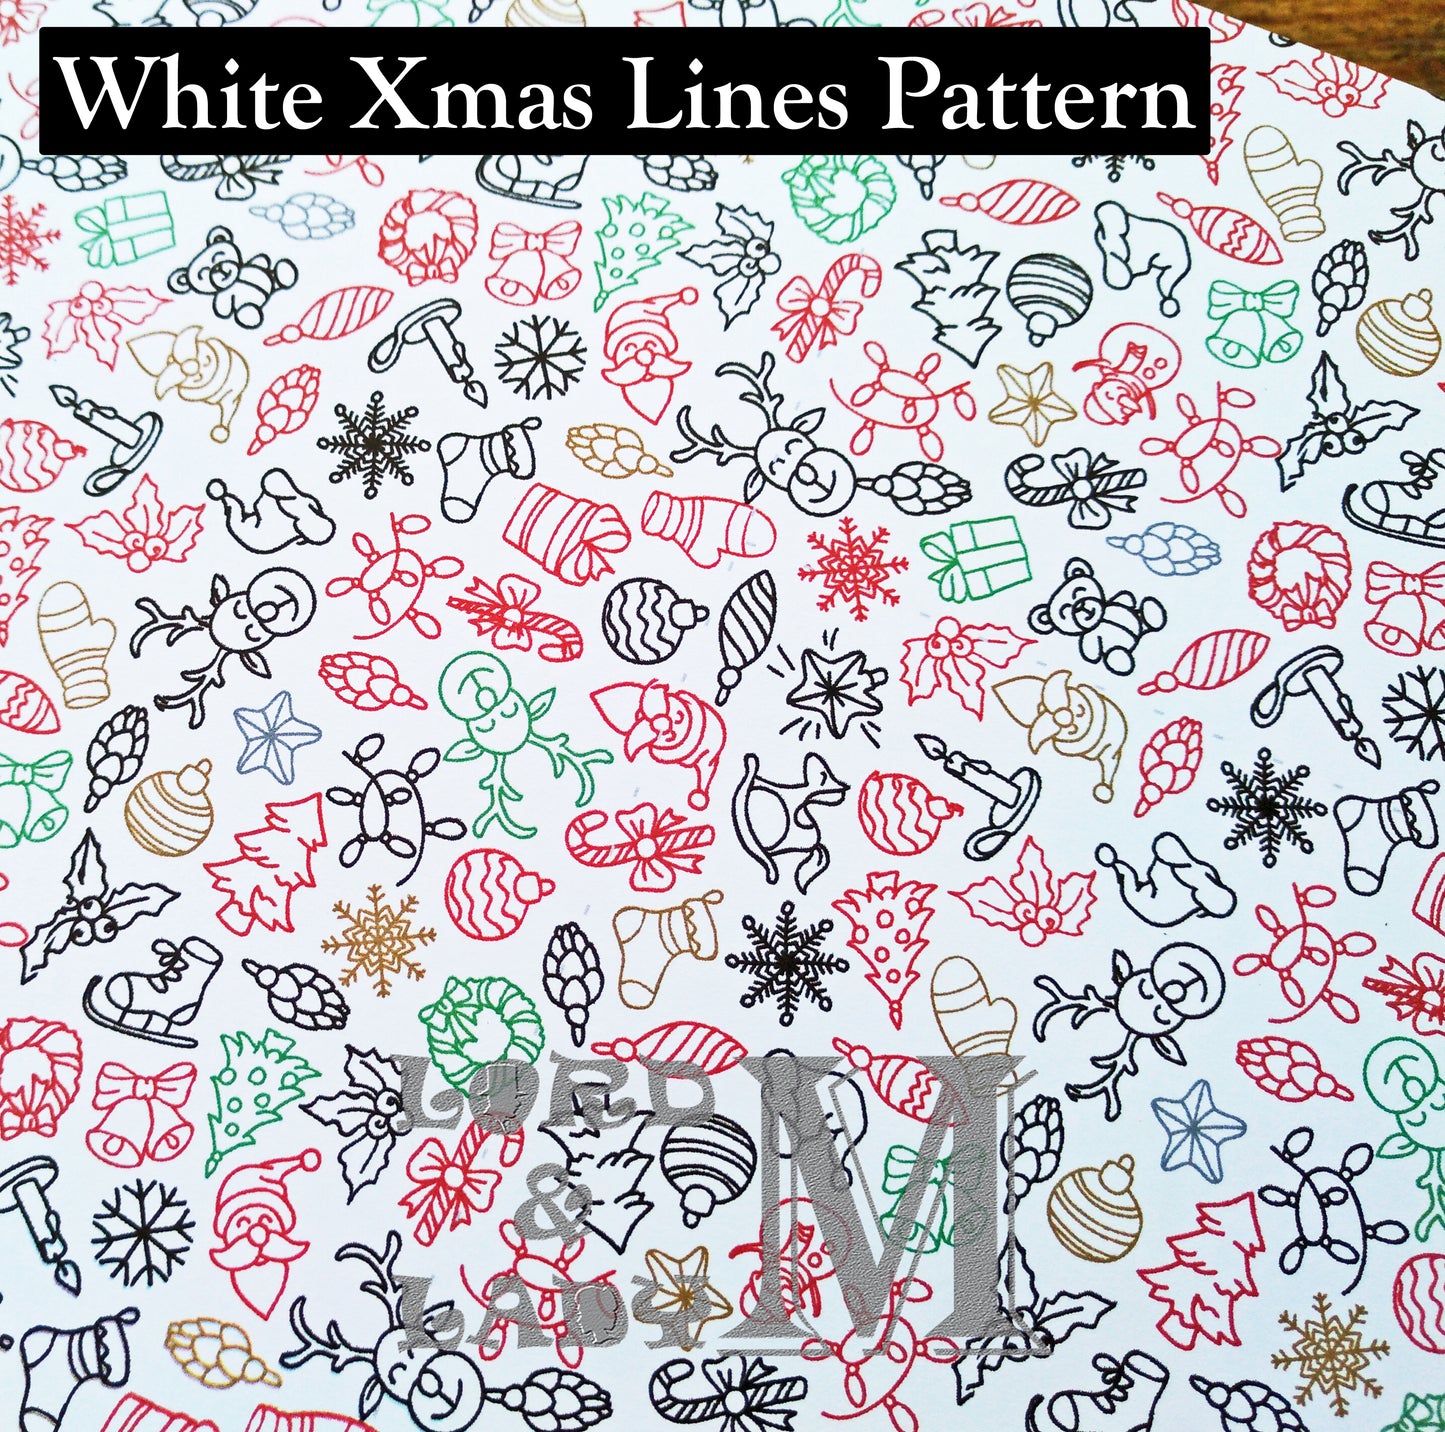 13cm - Personalised Letter From Santa - White Xmas Lines